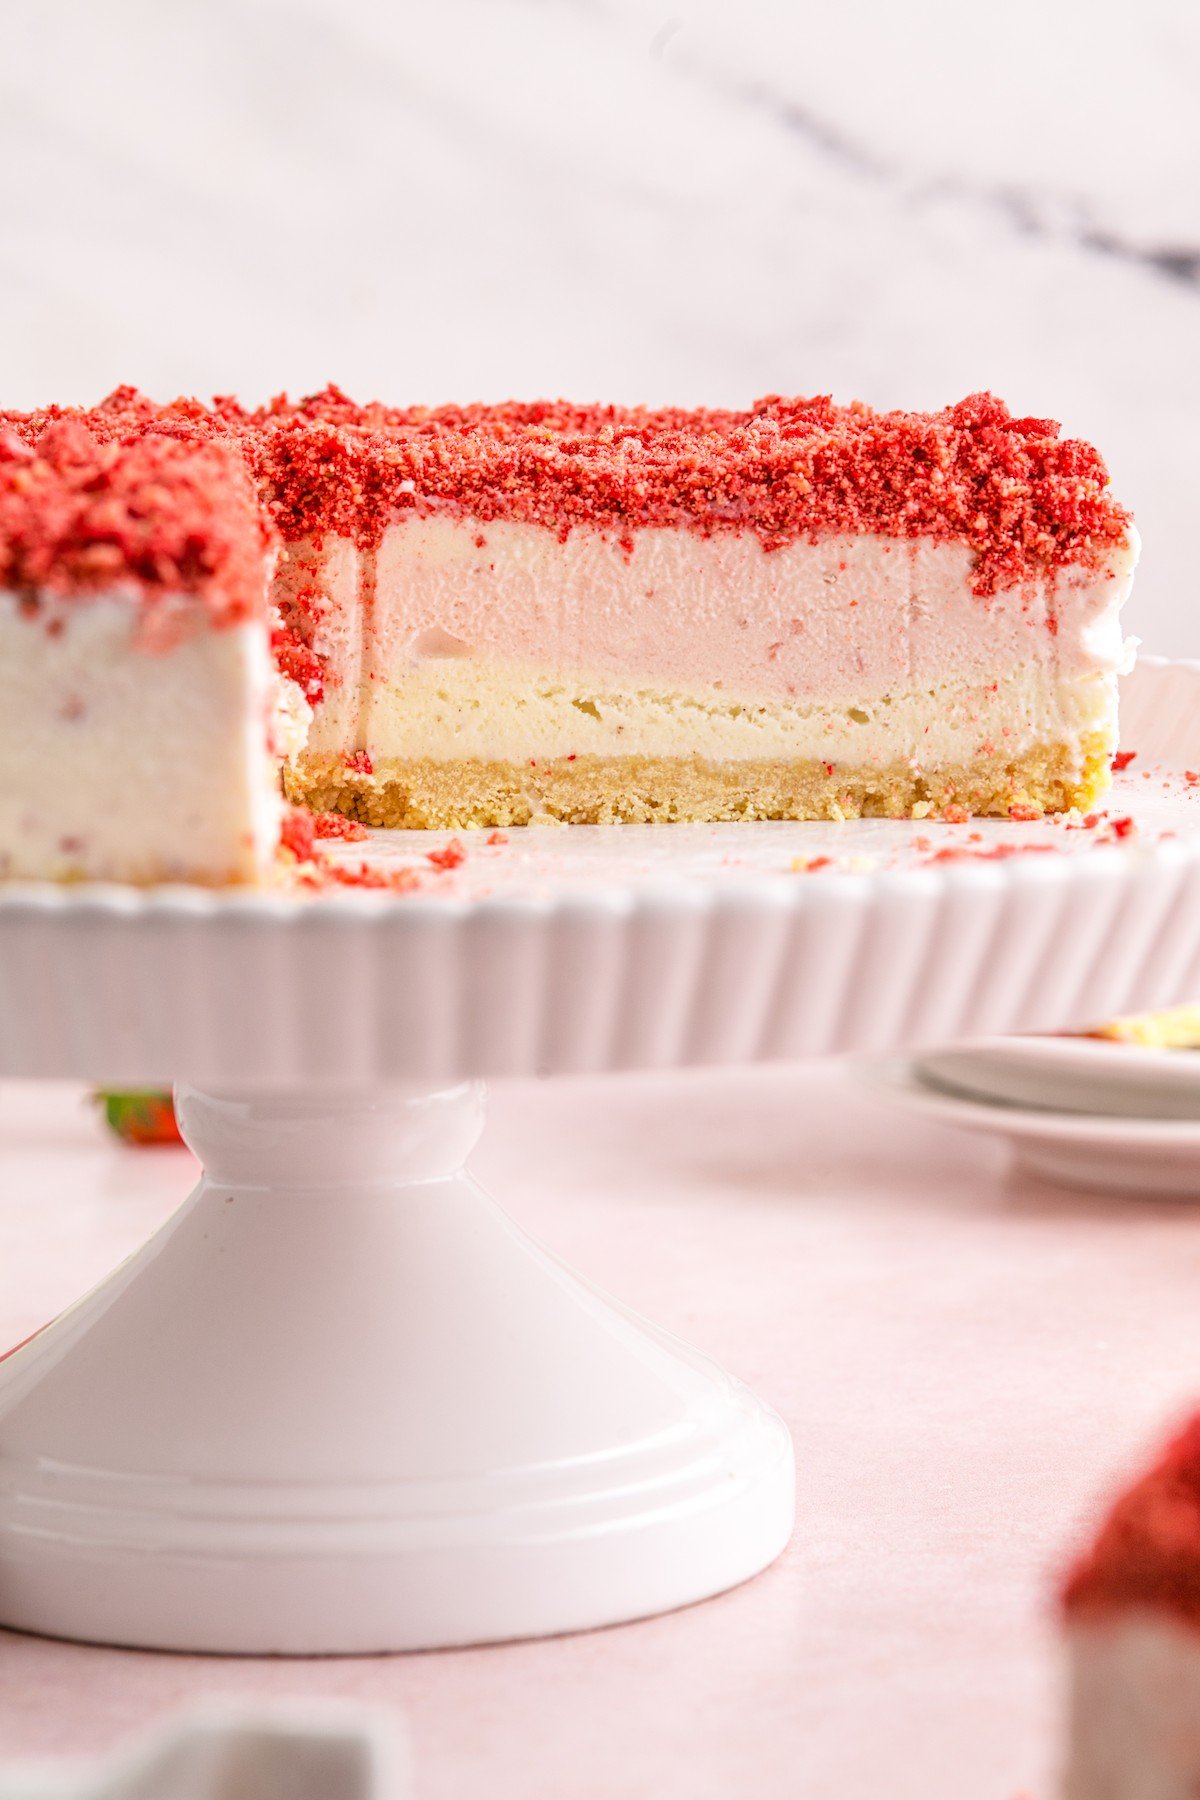 An ice cream cake with slices removed, showing the layers inside.